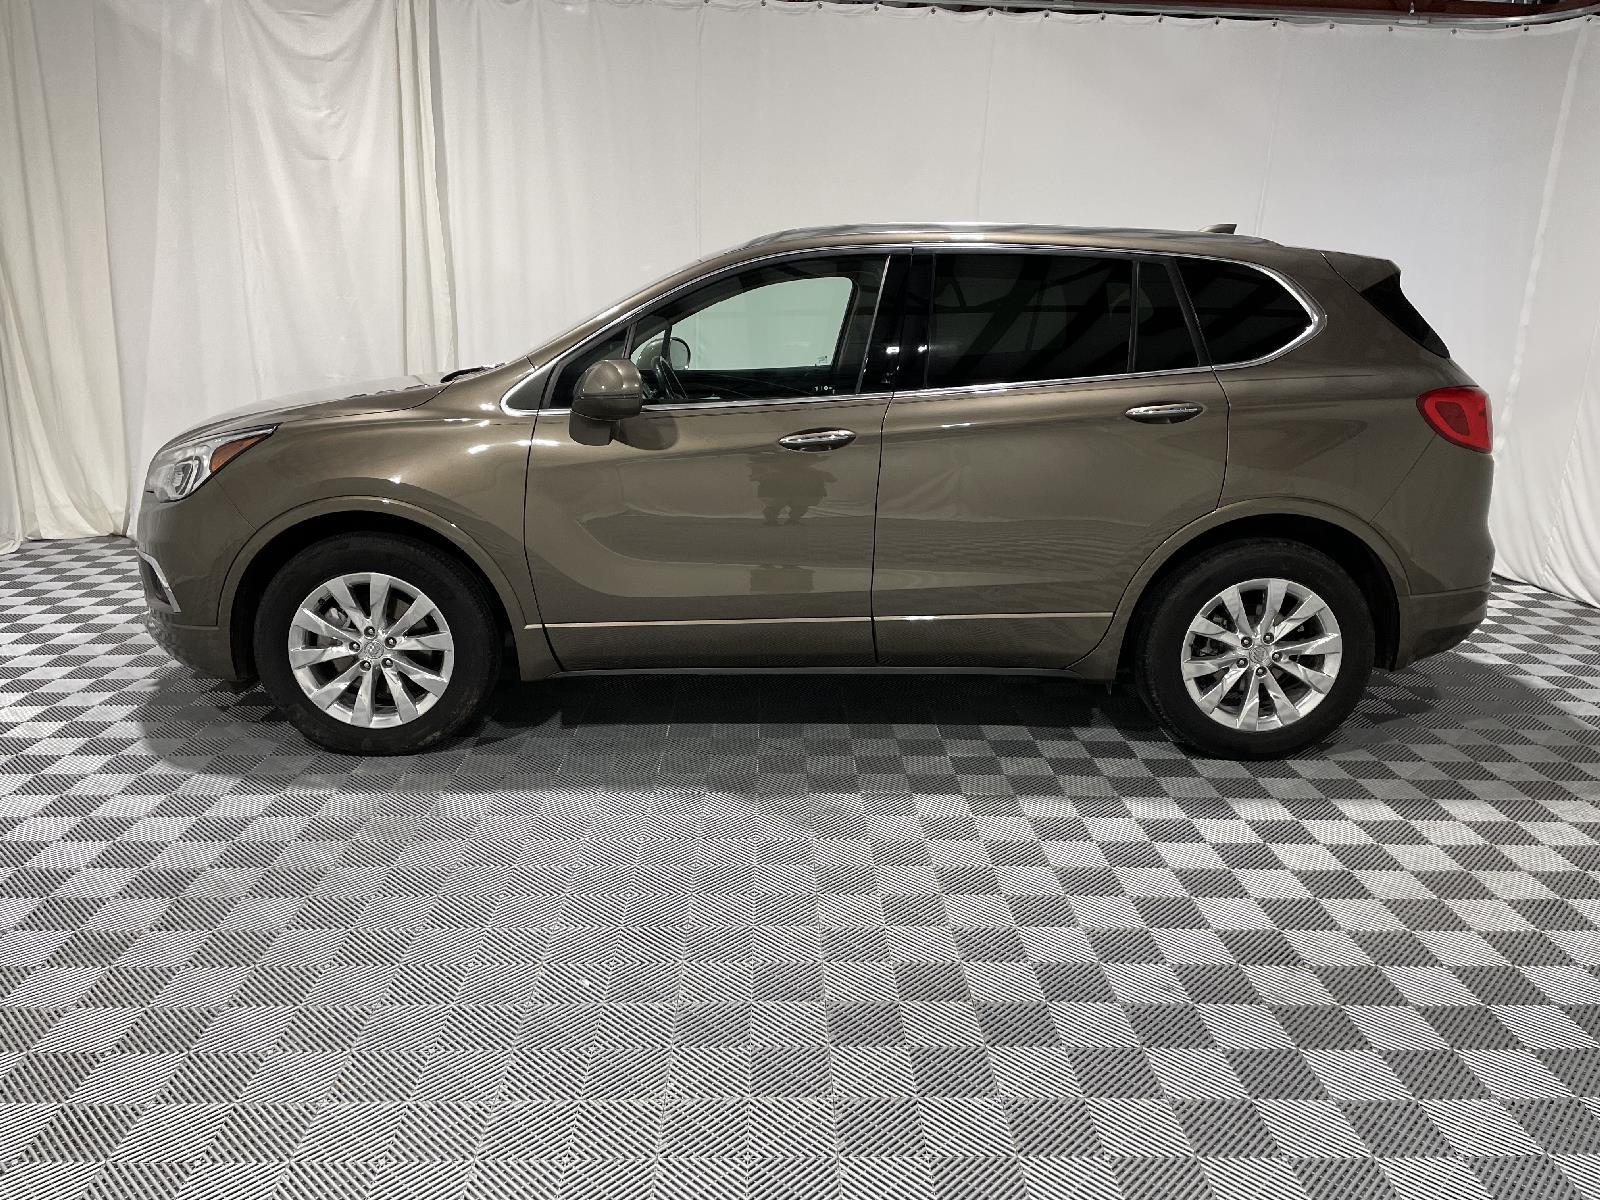 Used 2017 Buick Envision Essence SUV for sale in St Joseph MO